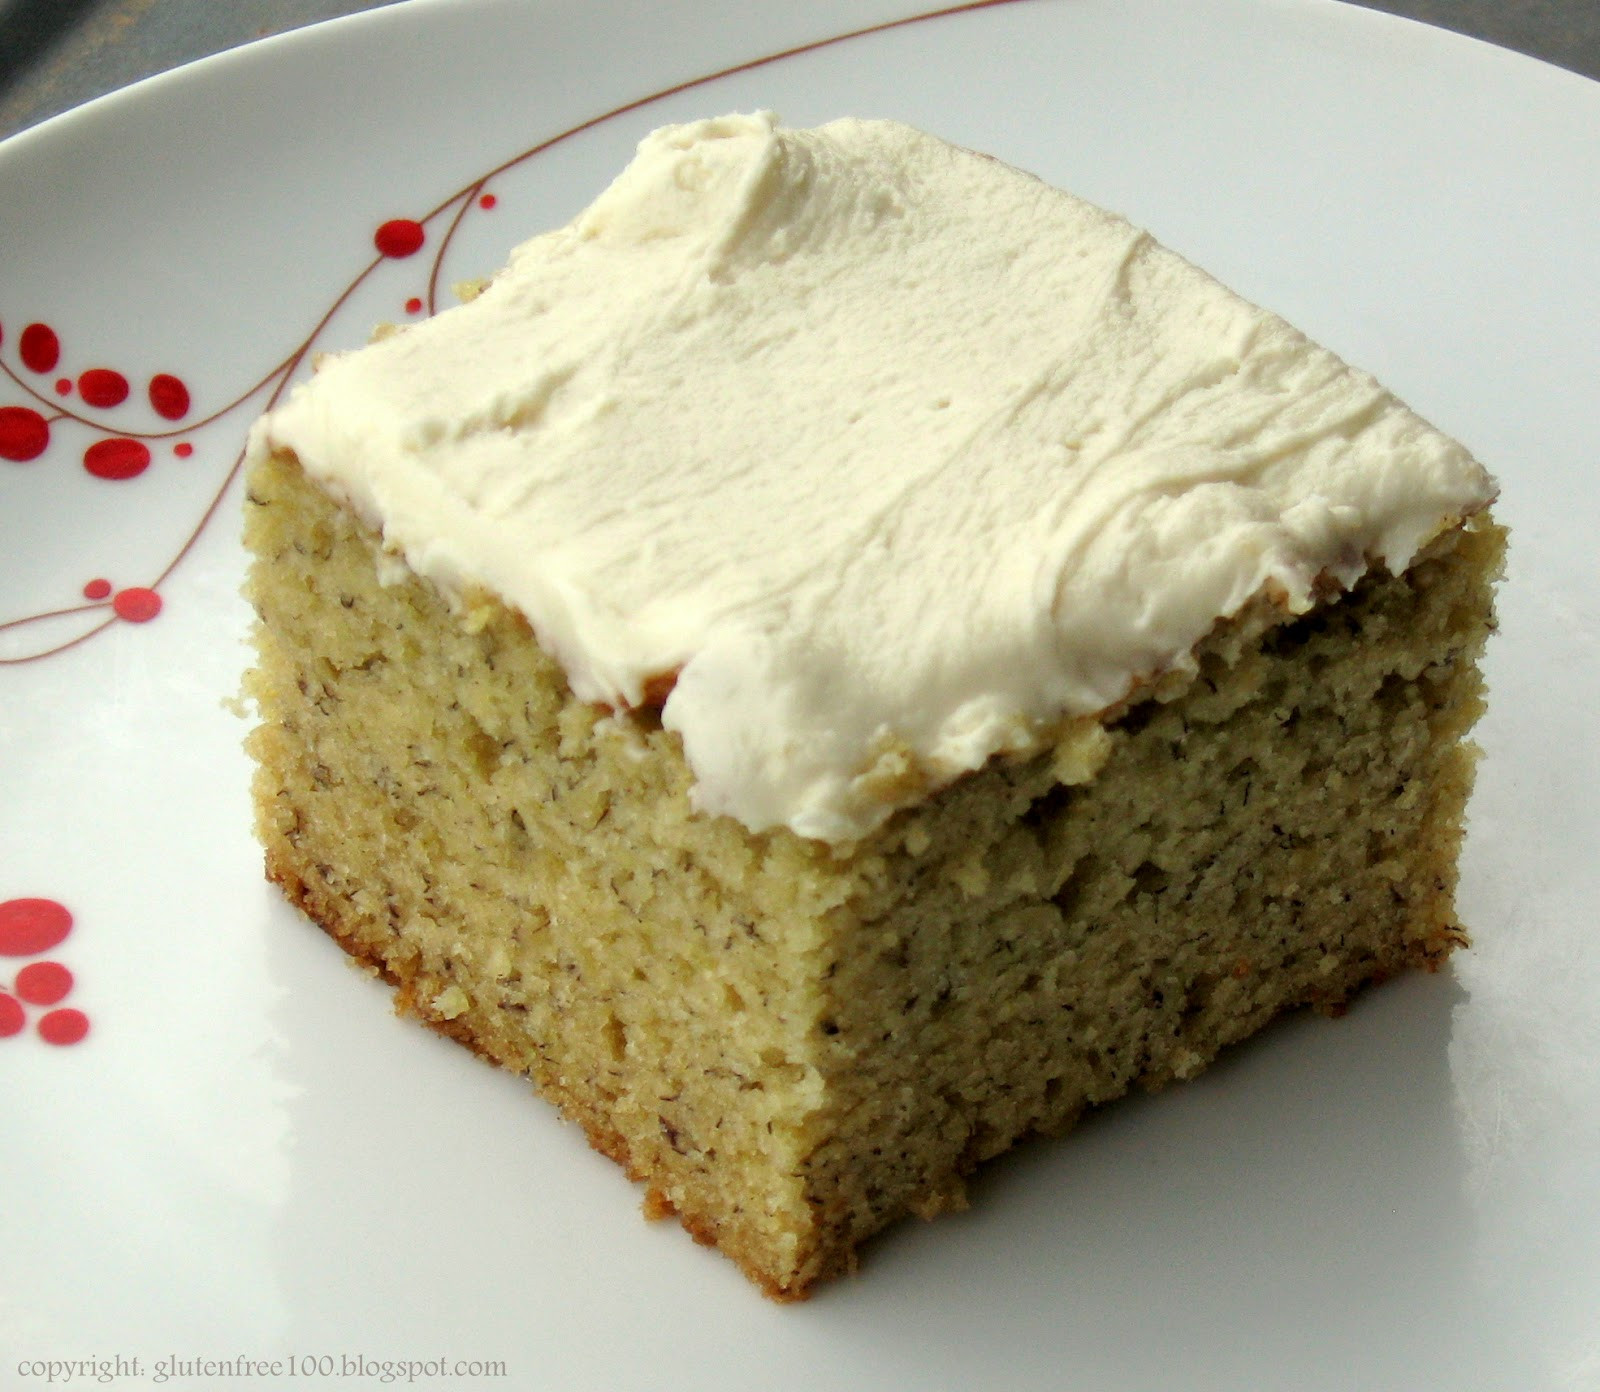 Gluten Free Cake Recipe
 Gluten Free Banana Cake with Browned Butter Frosting Recipe